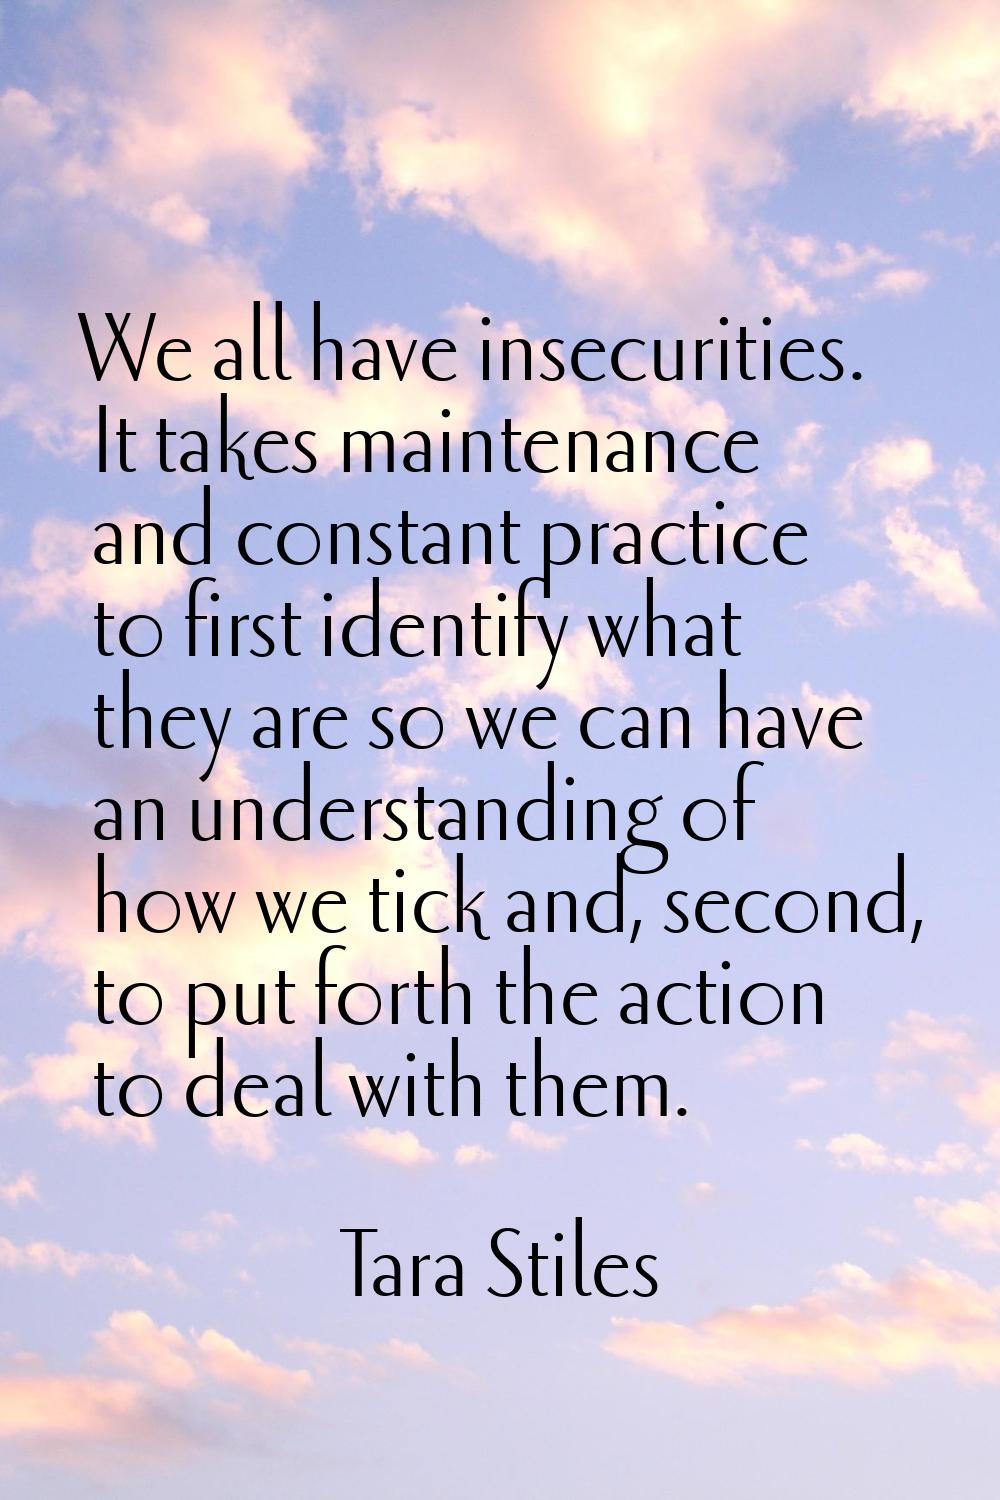 We all have insecurities. It takes maintenance and constant practice to first identify what they ar